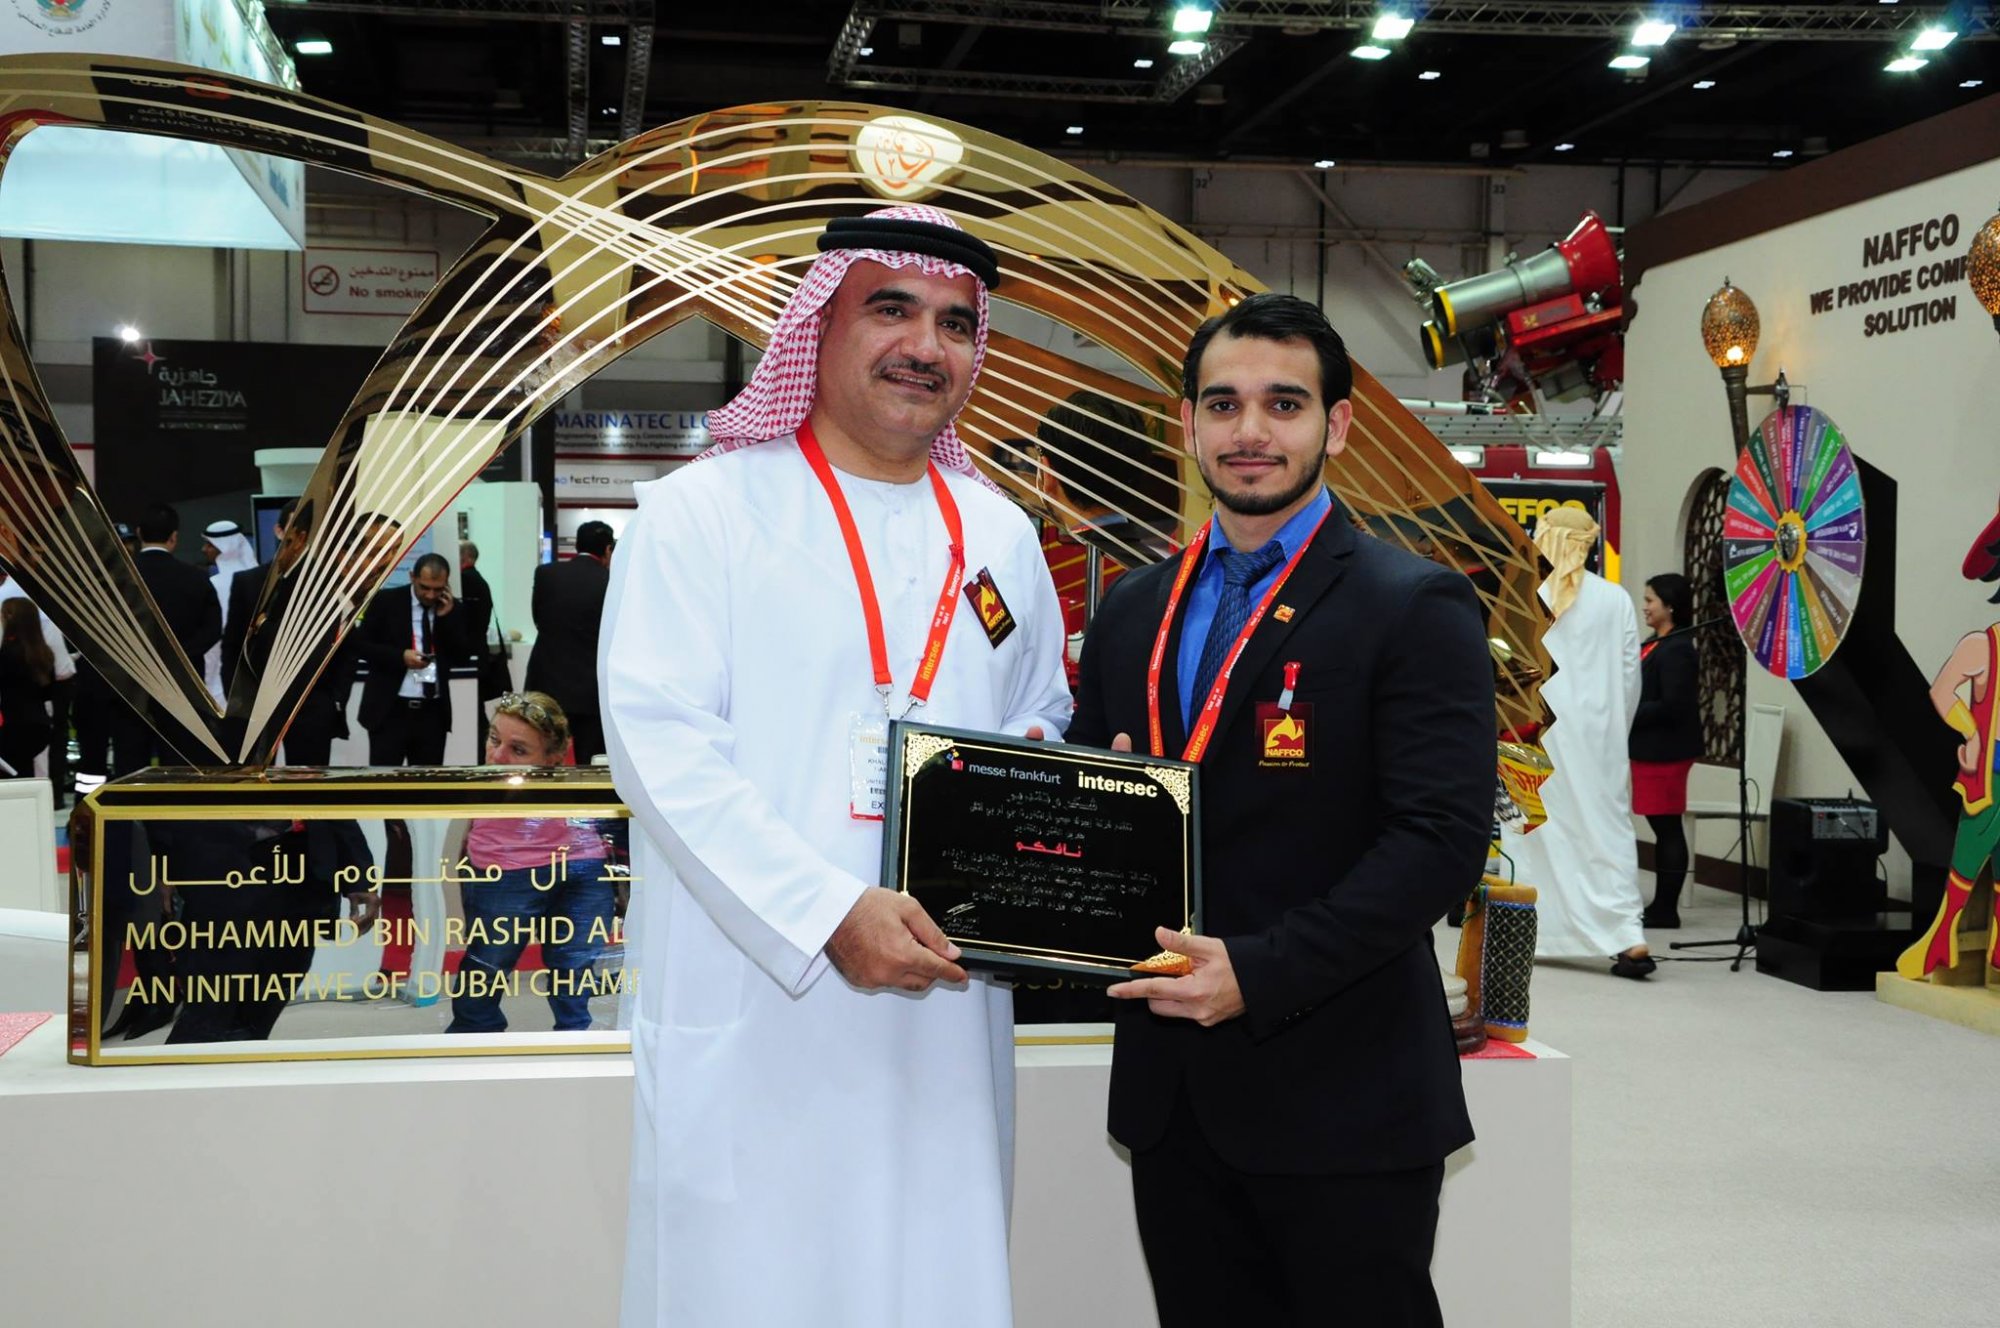 NAFFCO Wins Best Stand Award At Intersec